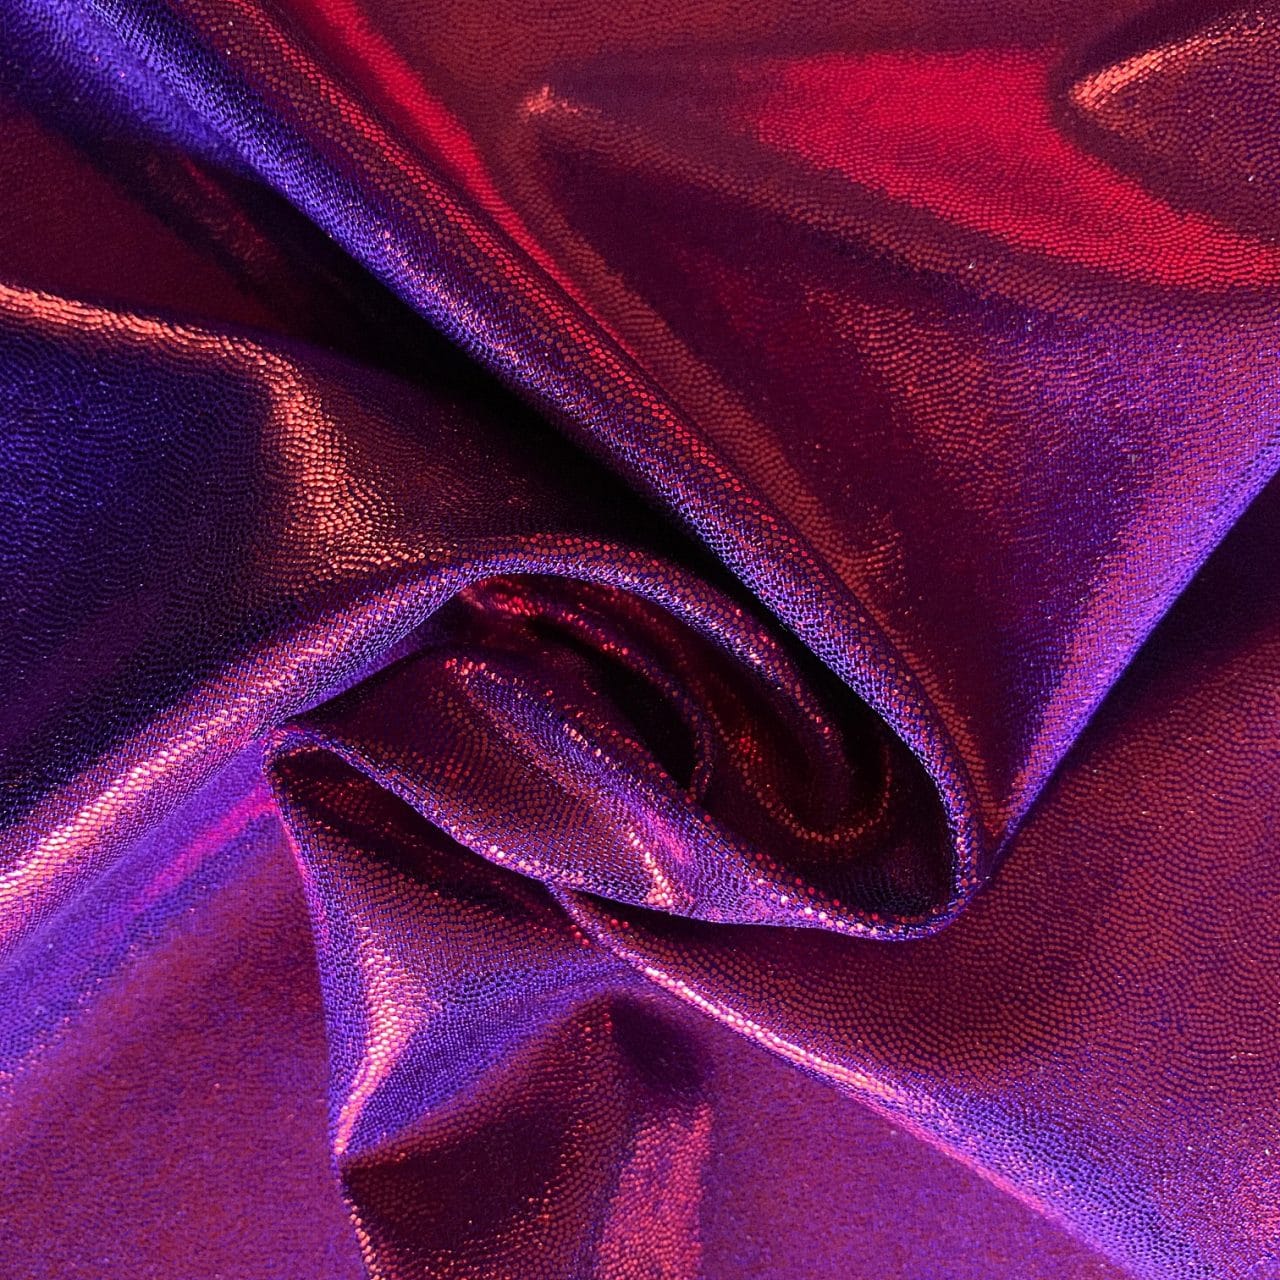 Lavender Gloss Liquid Latex Sheen Style Spandex Fabric by the Yard for  Leggings, Tops, Dresses and More. -  Canada